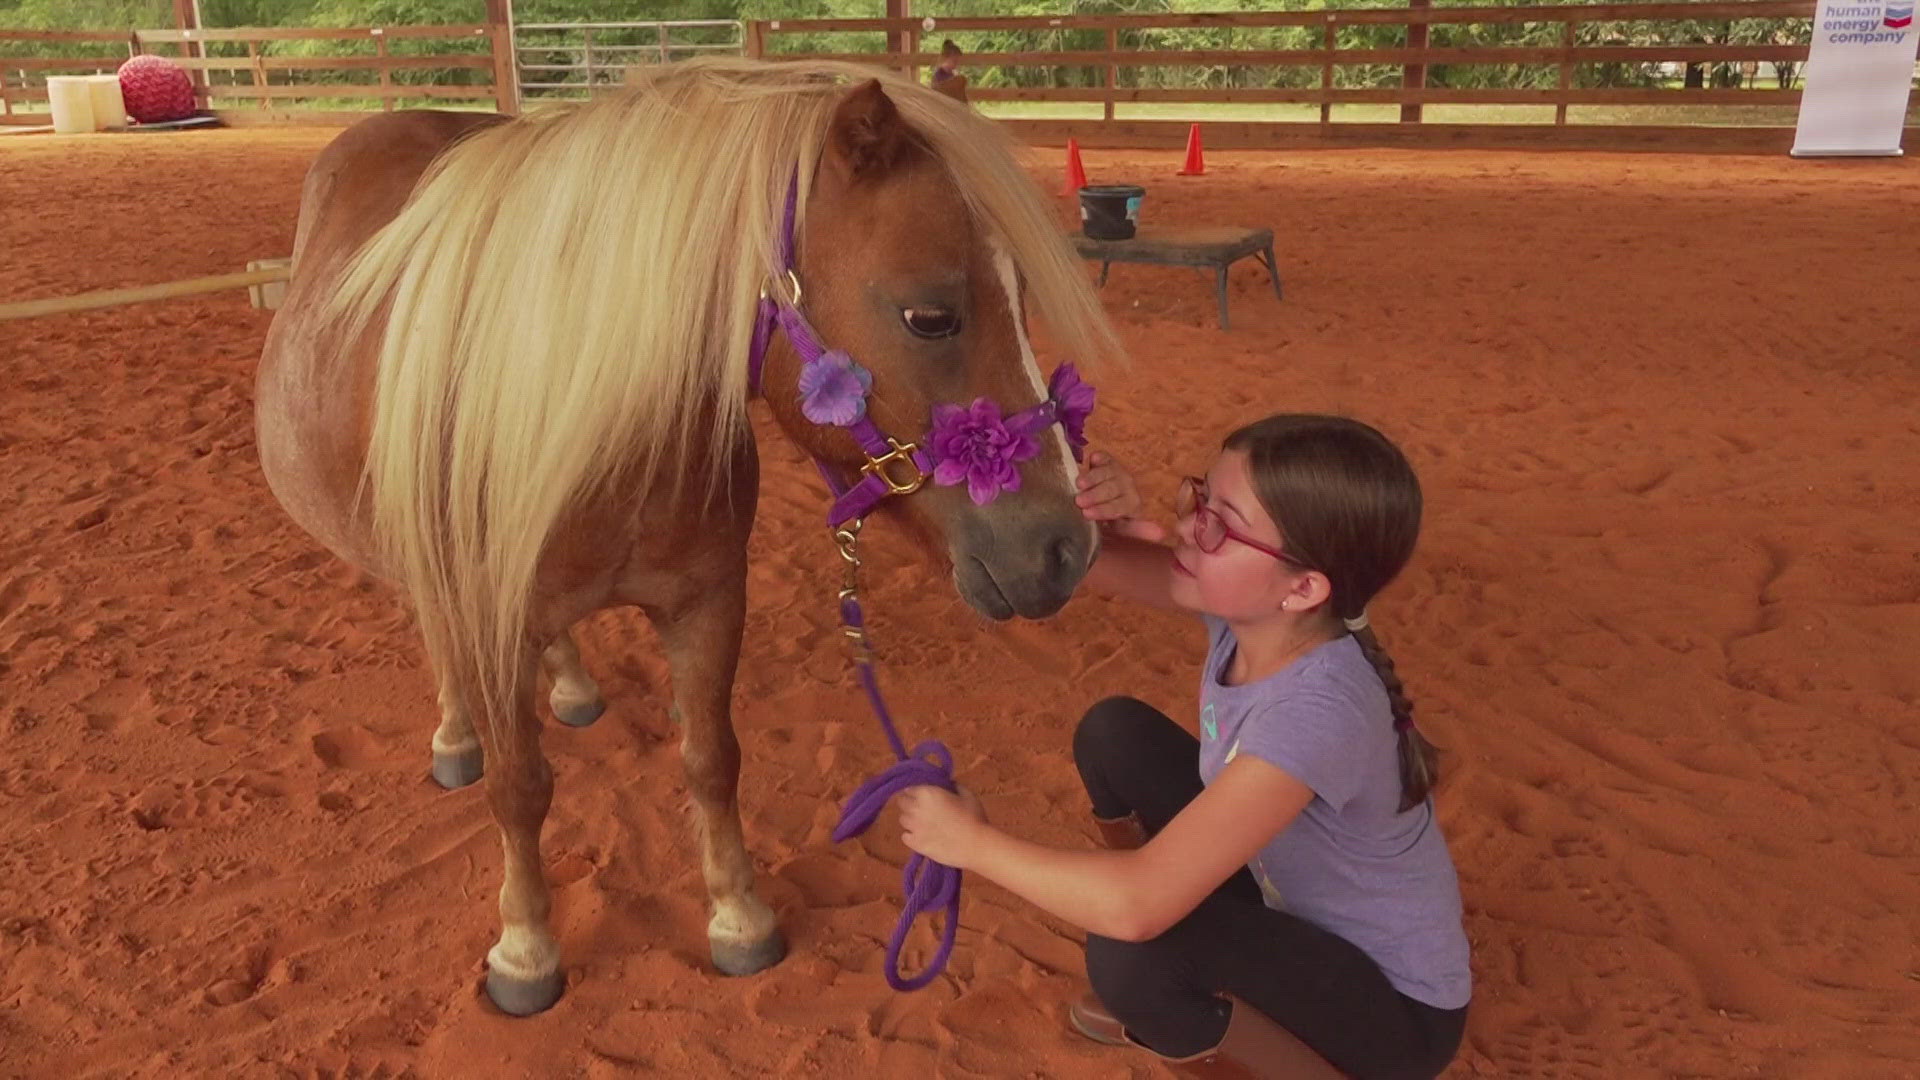 Equine Reflections has many types of teaching and healing programs for people age 5 to senior citizens.